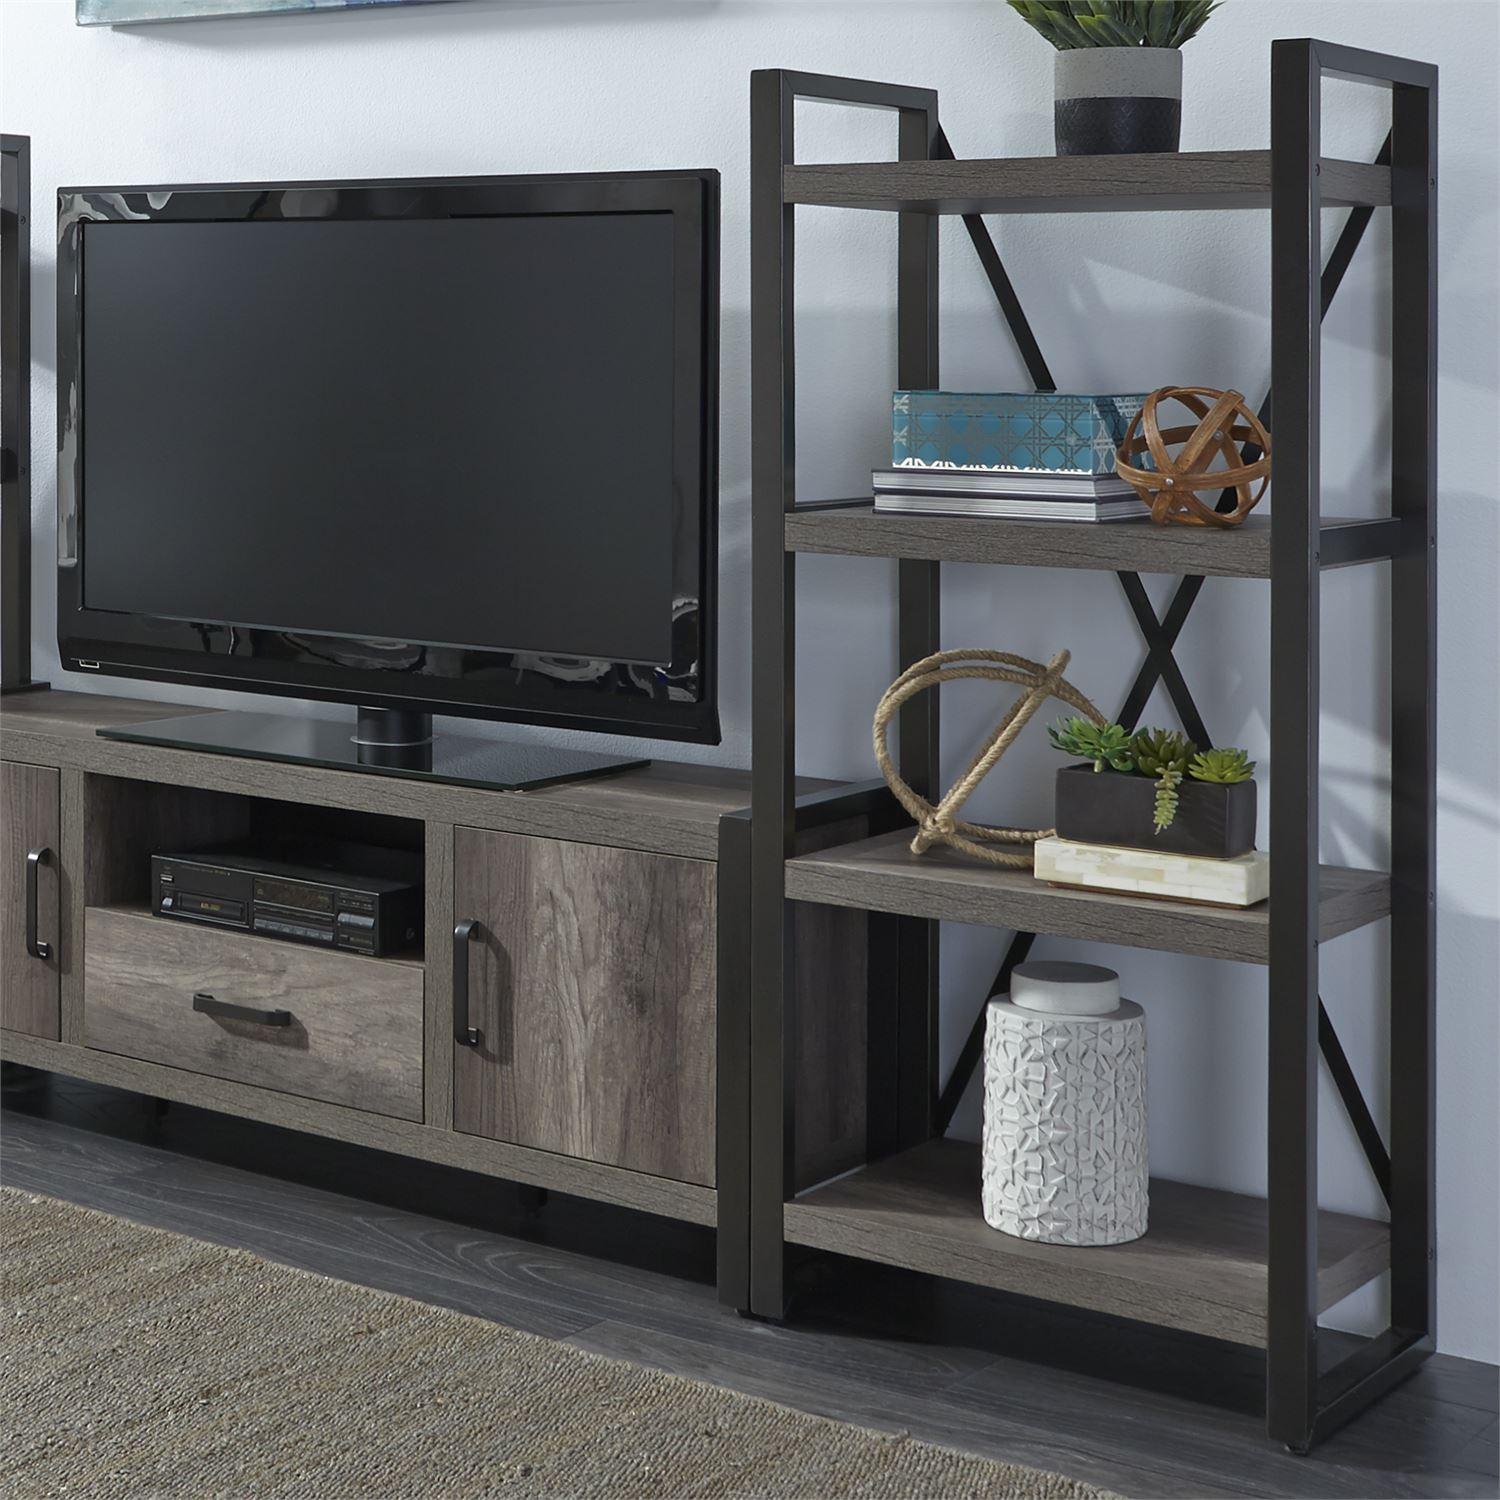 Contemporary Shelve Tanners Creek  (686-ENTW) Shelve 686-EP60 in Gray 